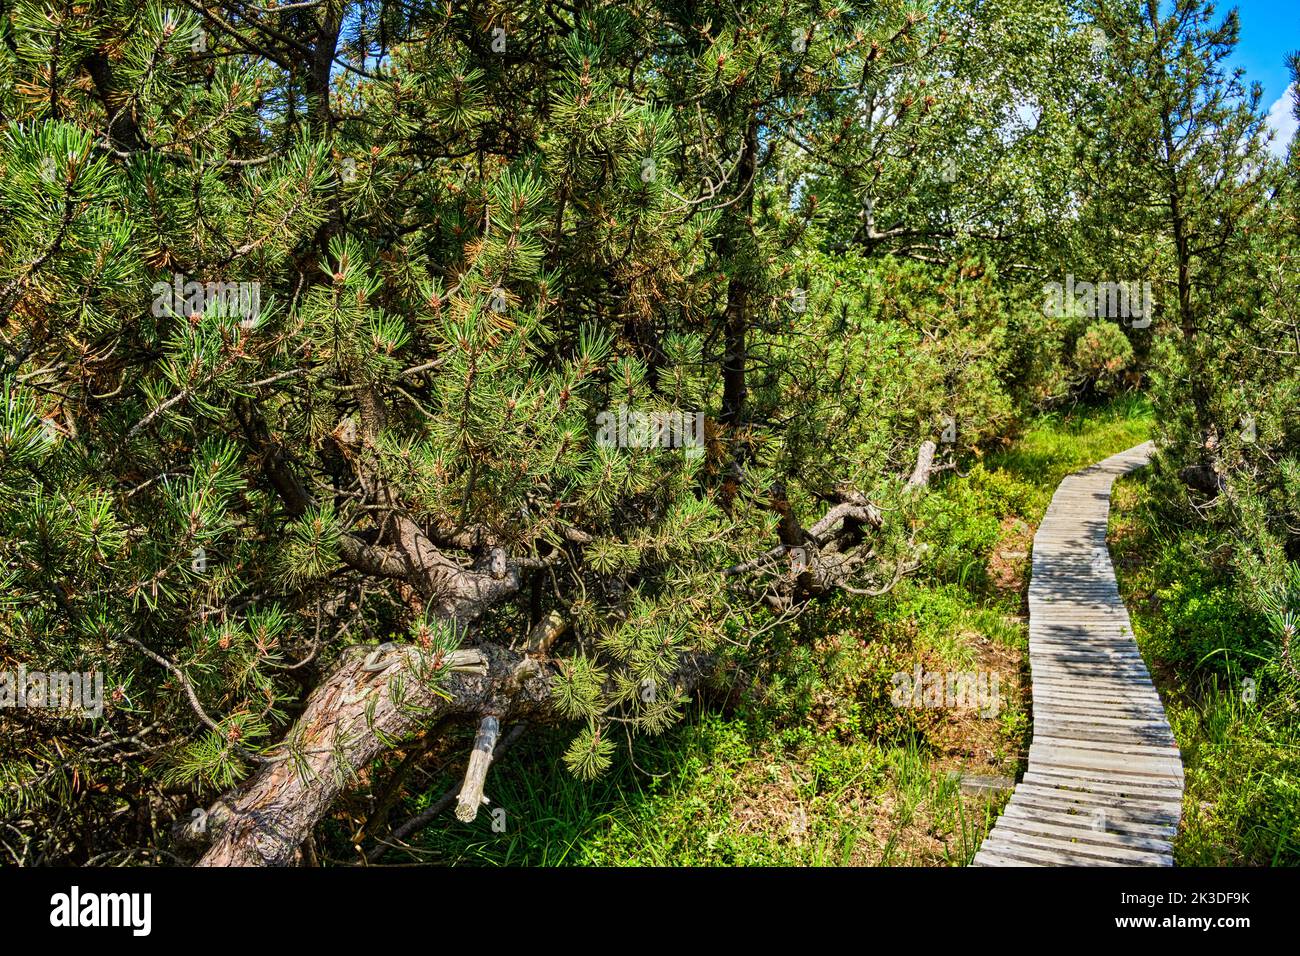 A narrow boardwalk leads through landscape and vegetation in the nature reserve of the Georgenfeld Raised Bog, Altenberg, Saxony, Germany. Stock Photo